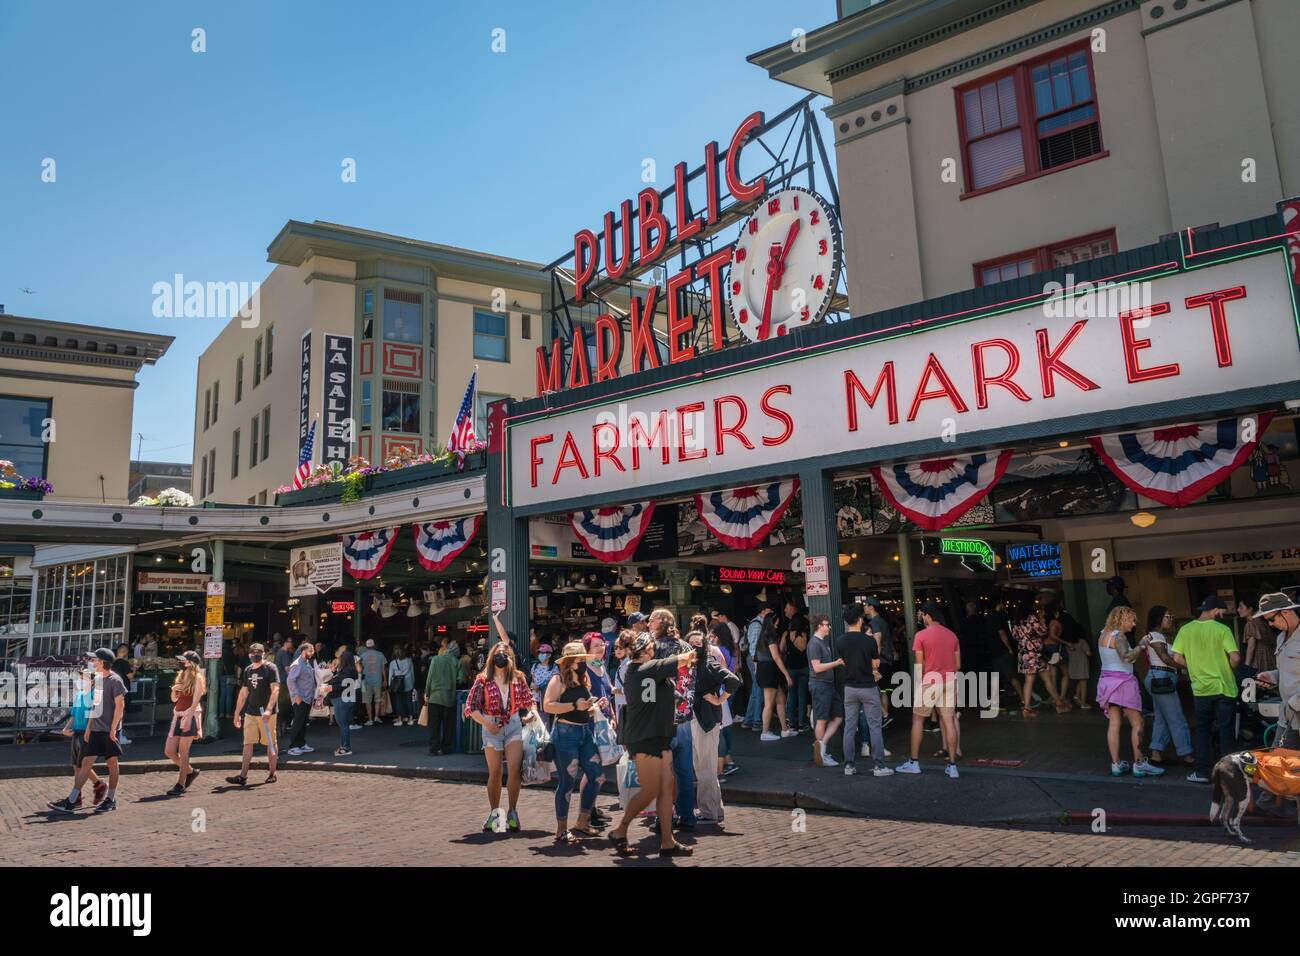 Seattle, WA, US - July 3, 2021: Seattle Public Farmers Market is busy on a summer day during the covid pandemic. Some people wear masks. Stock Photo